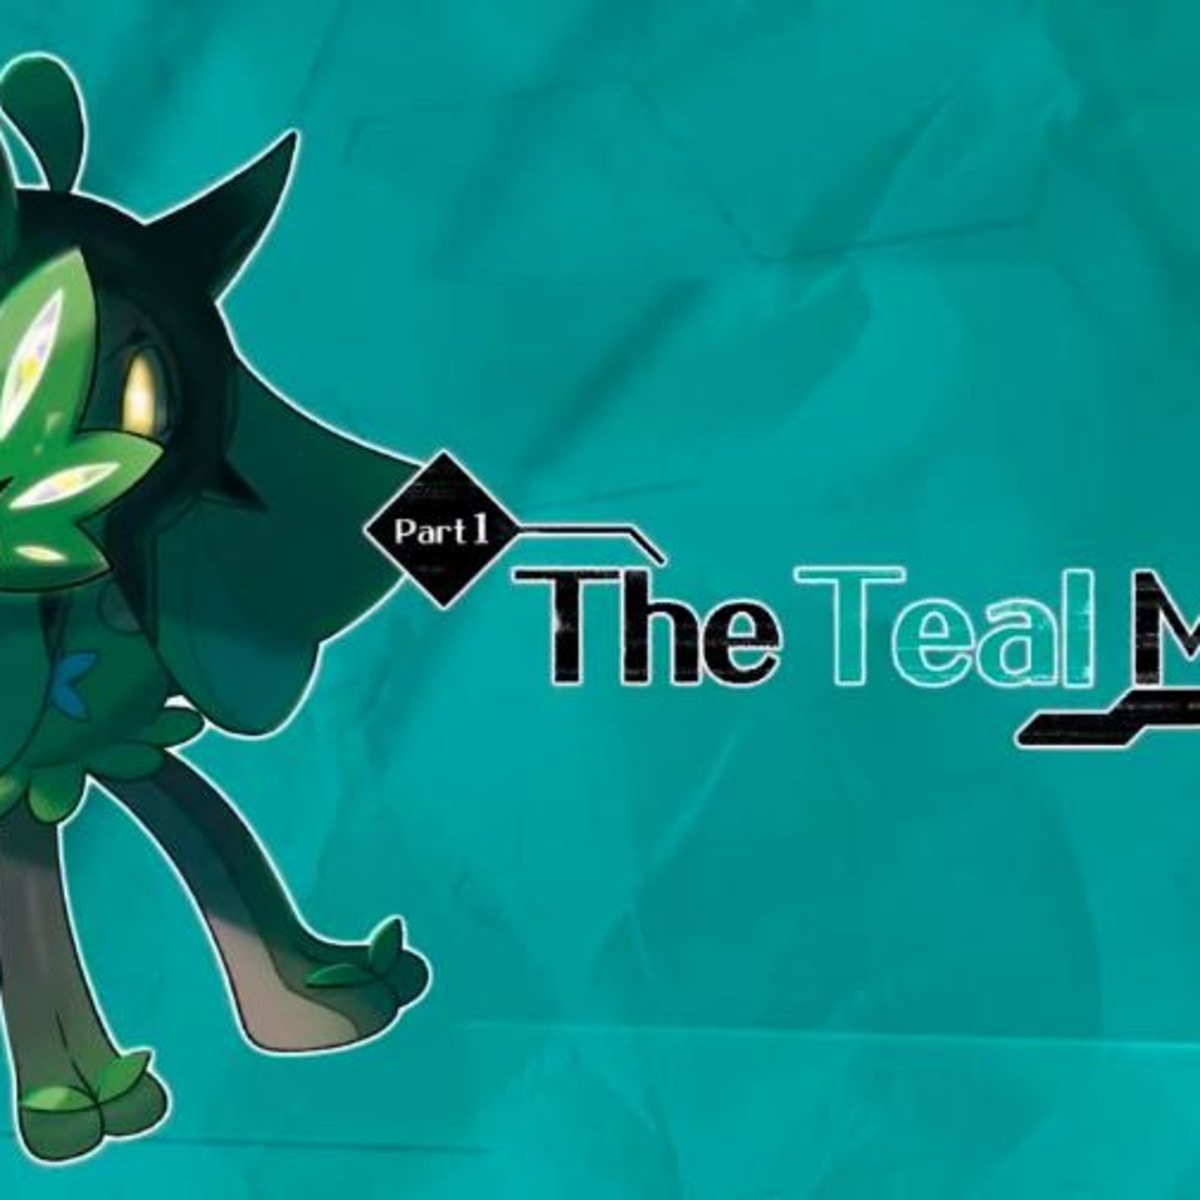 Pokemon Scarlet and Violet DLC Leak Reveals All the Pokemon in the Teal  Mask Pokedex